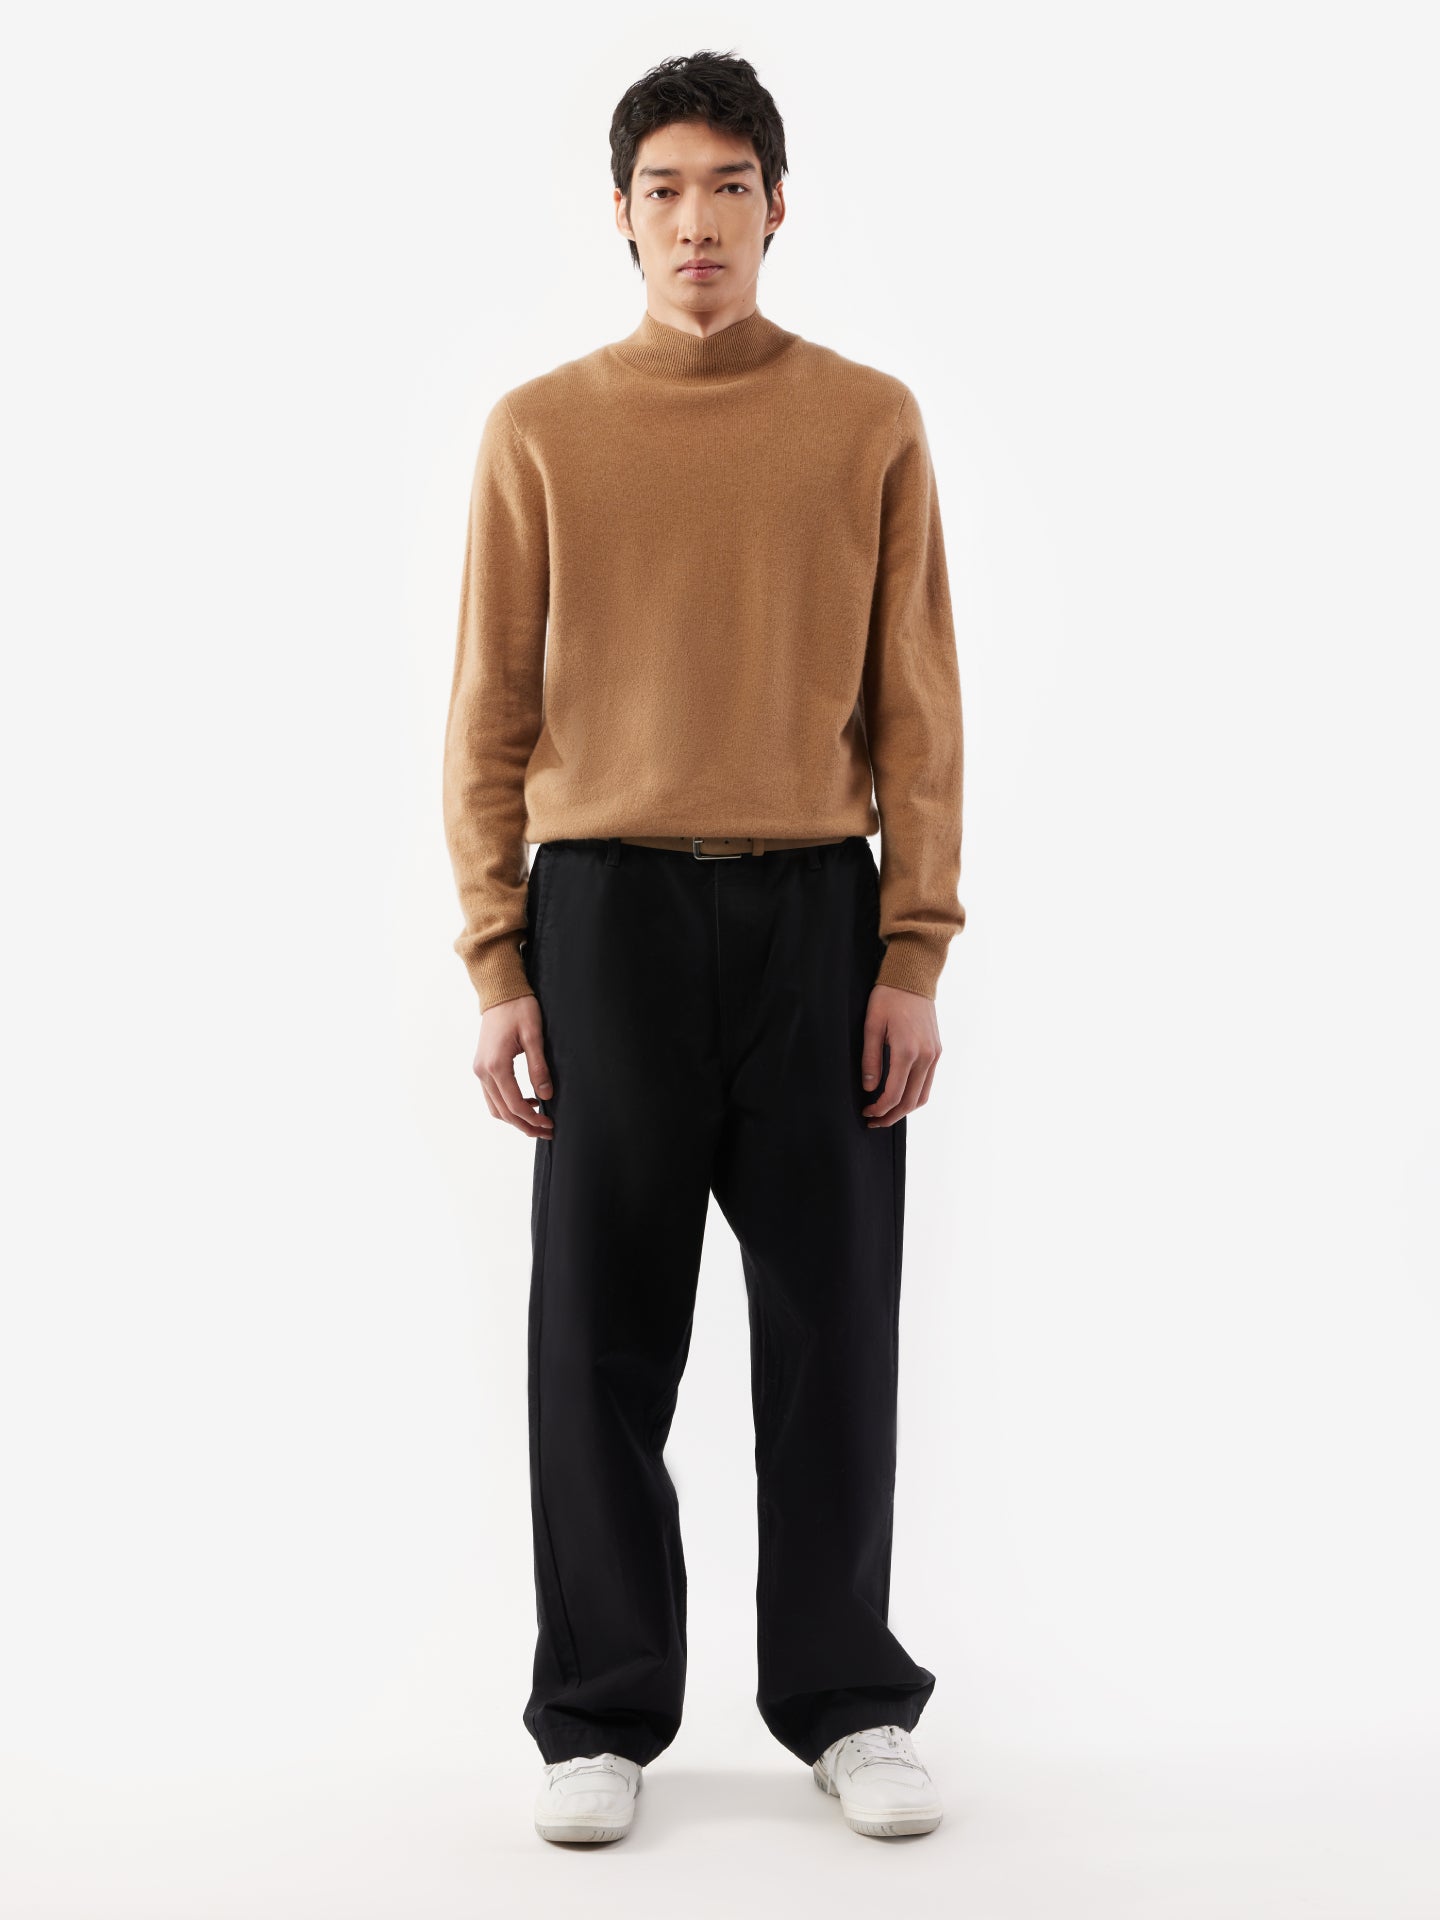 Ultimate Men's Cashmere Sweater Collection | GOBI Cashmere